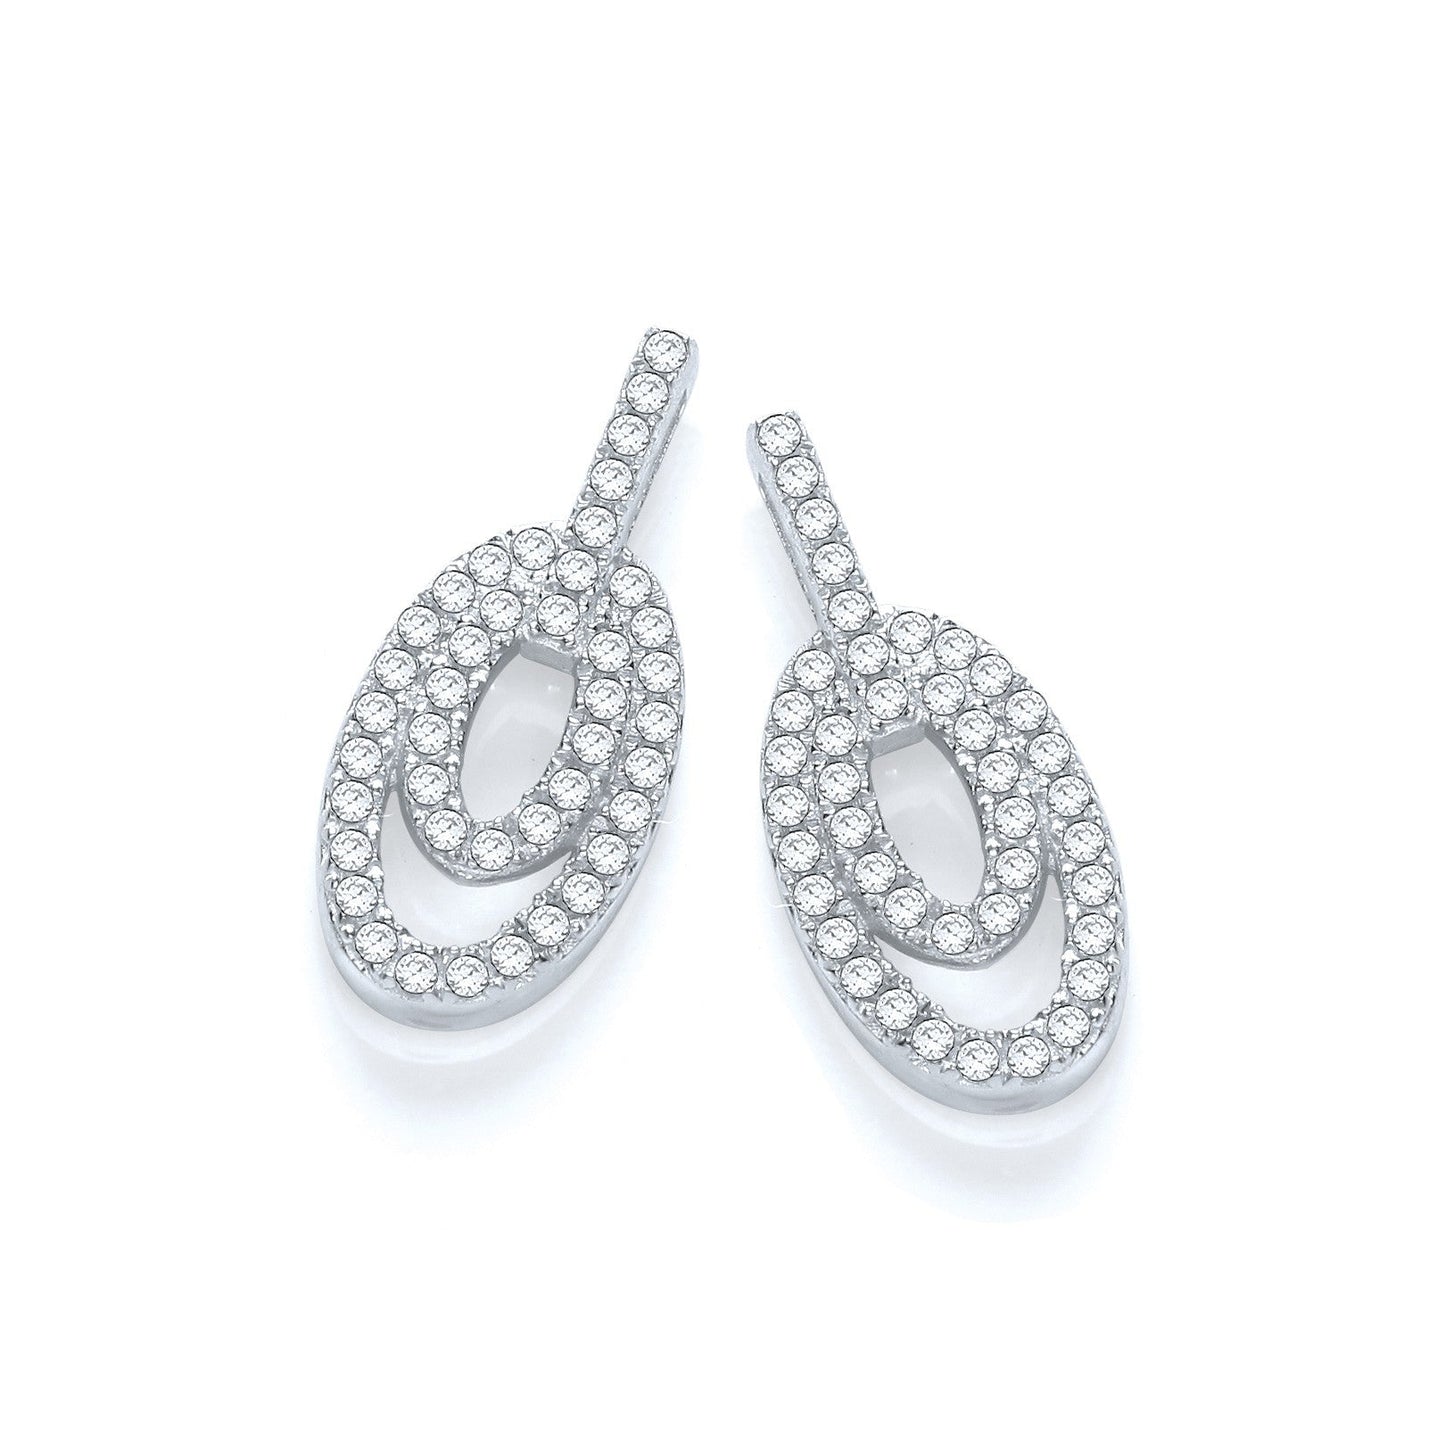 Stud 925 Sterling Silver 17 mm Earrings Set With CZs - FJewellery